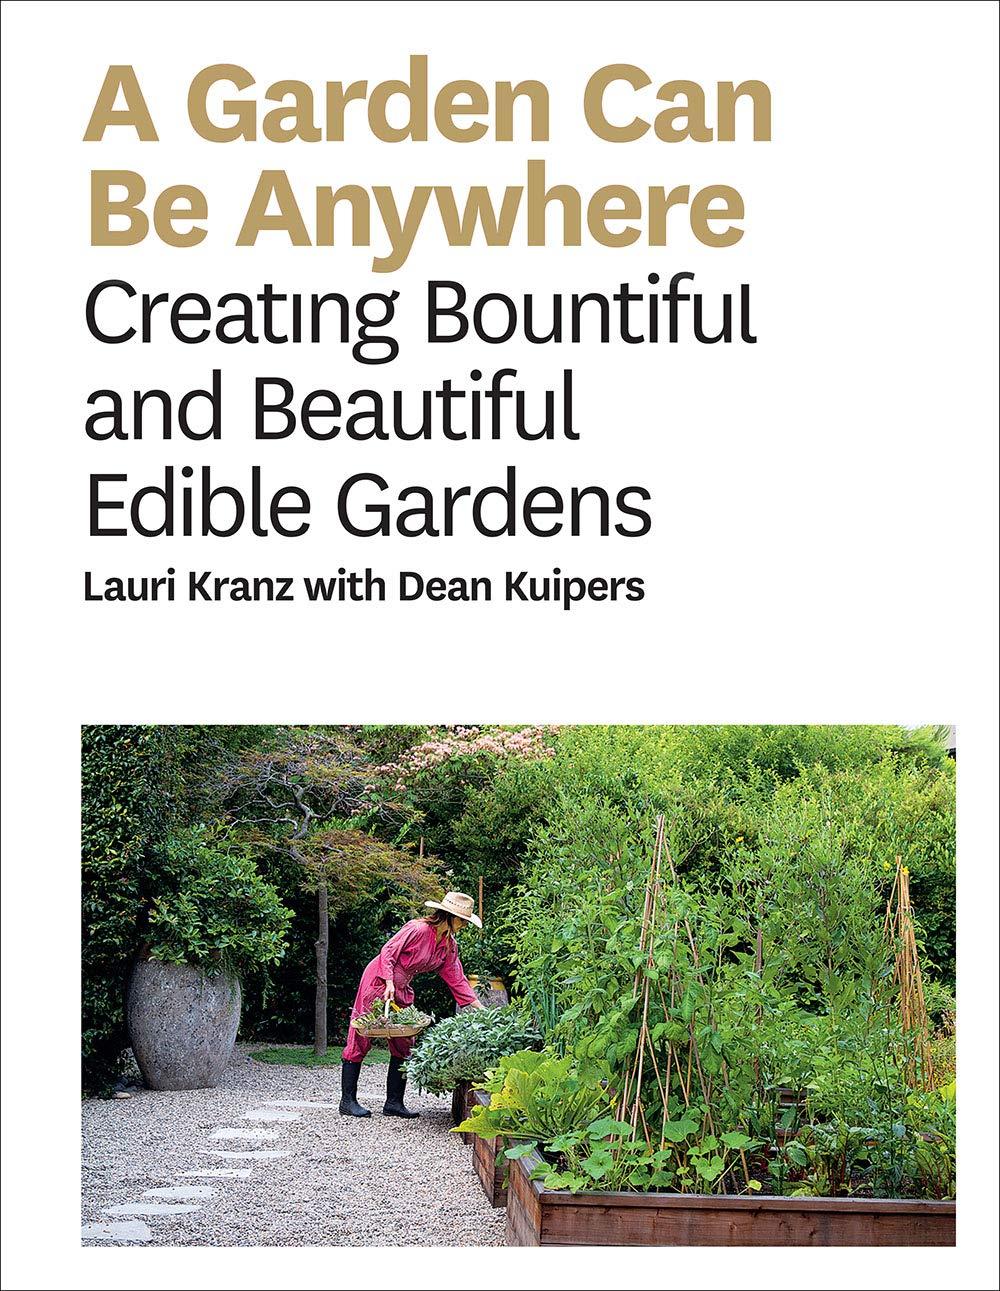 Garden Can Be Anywhere